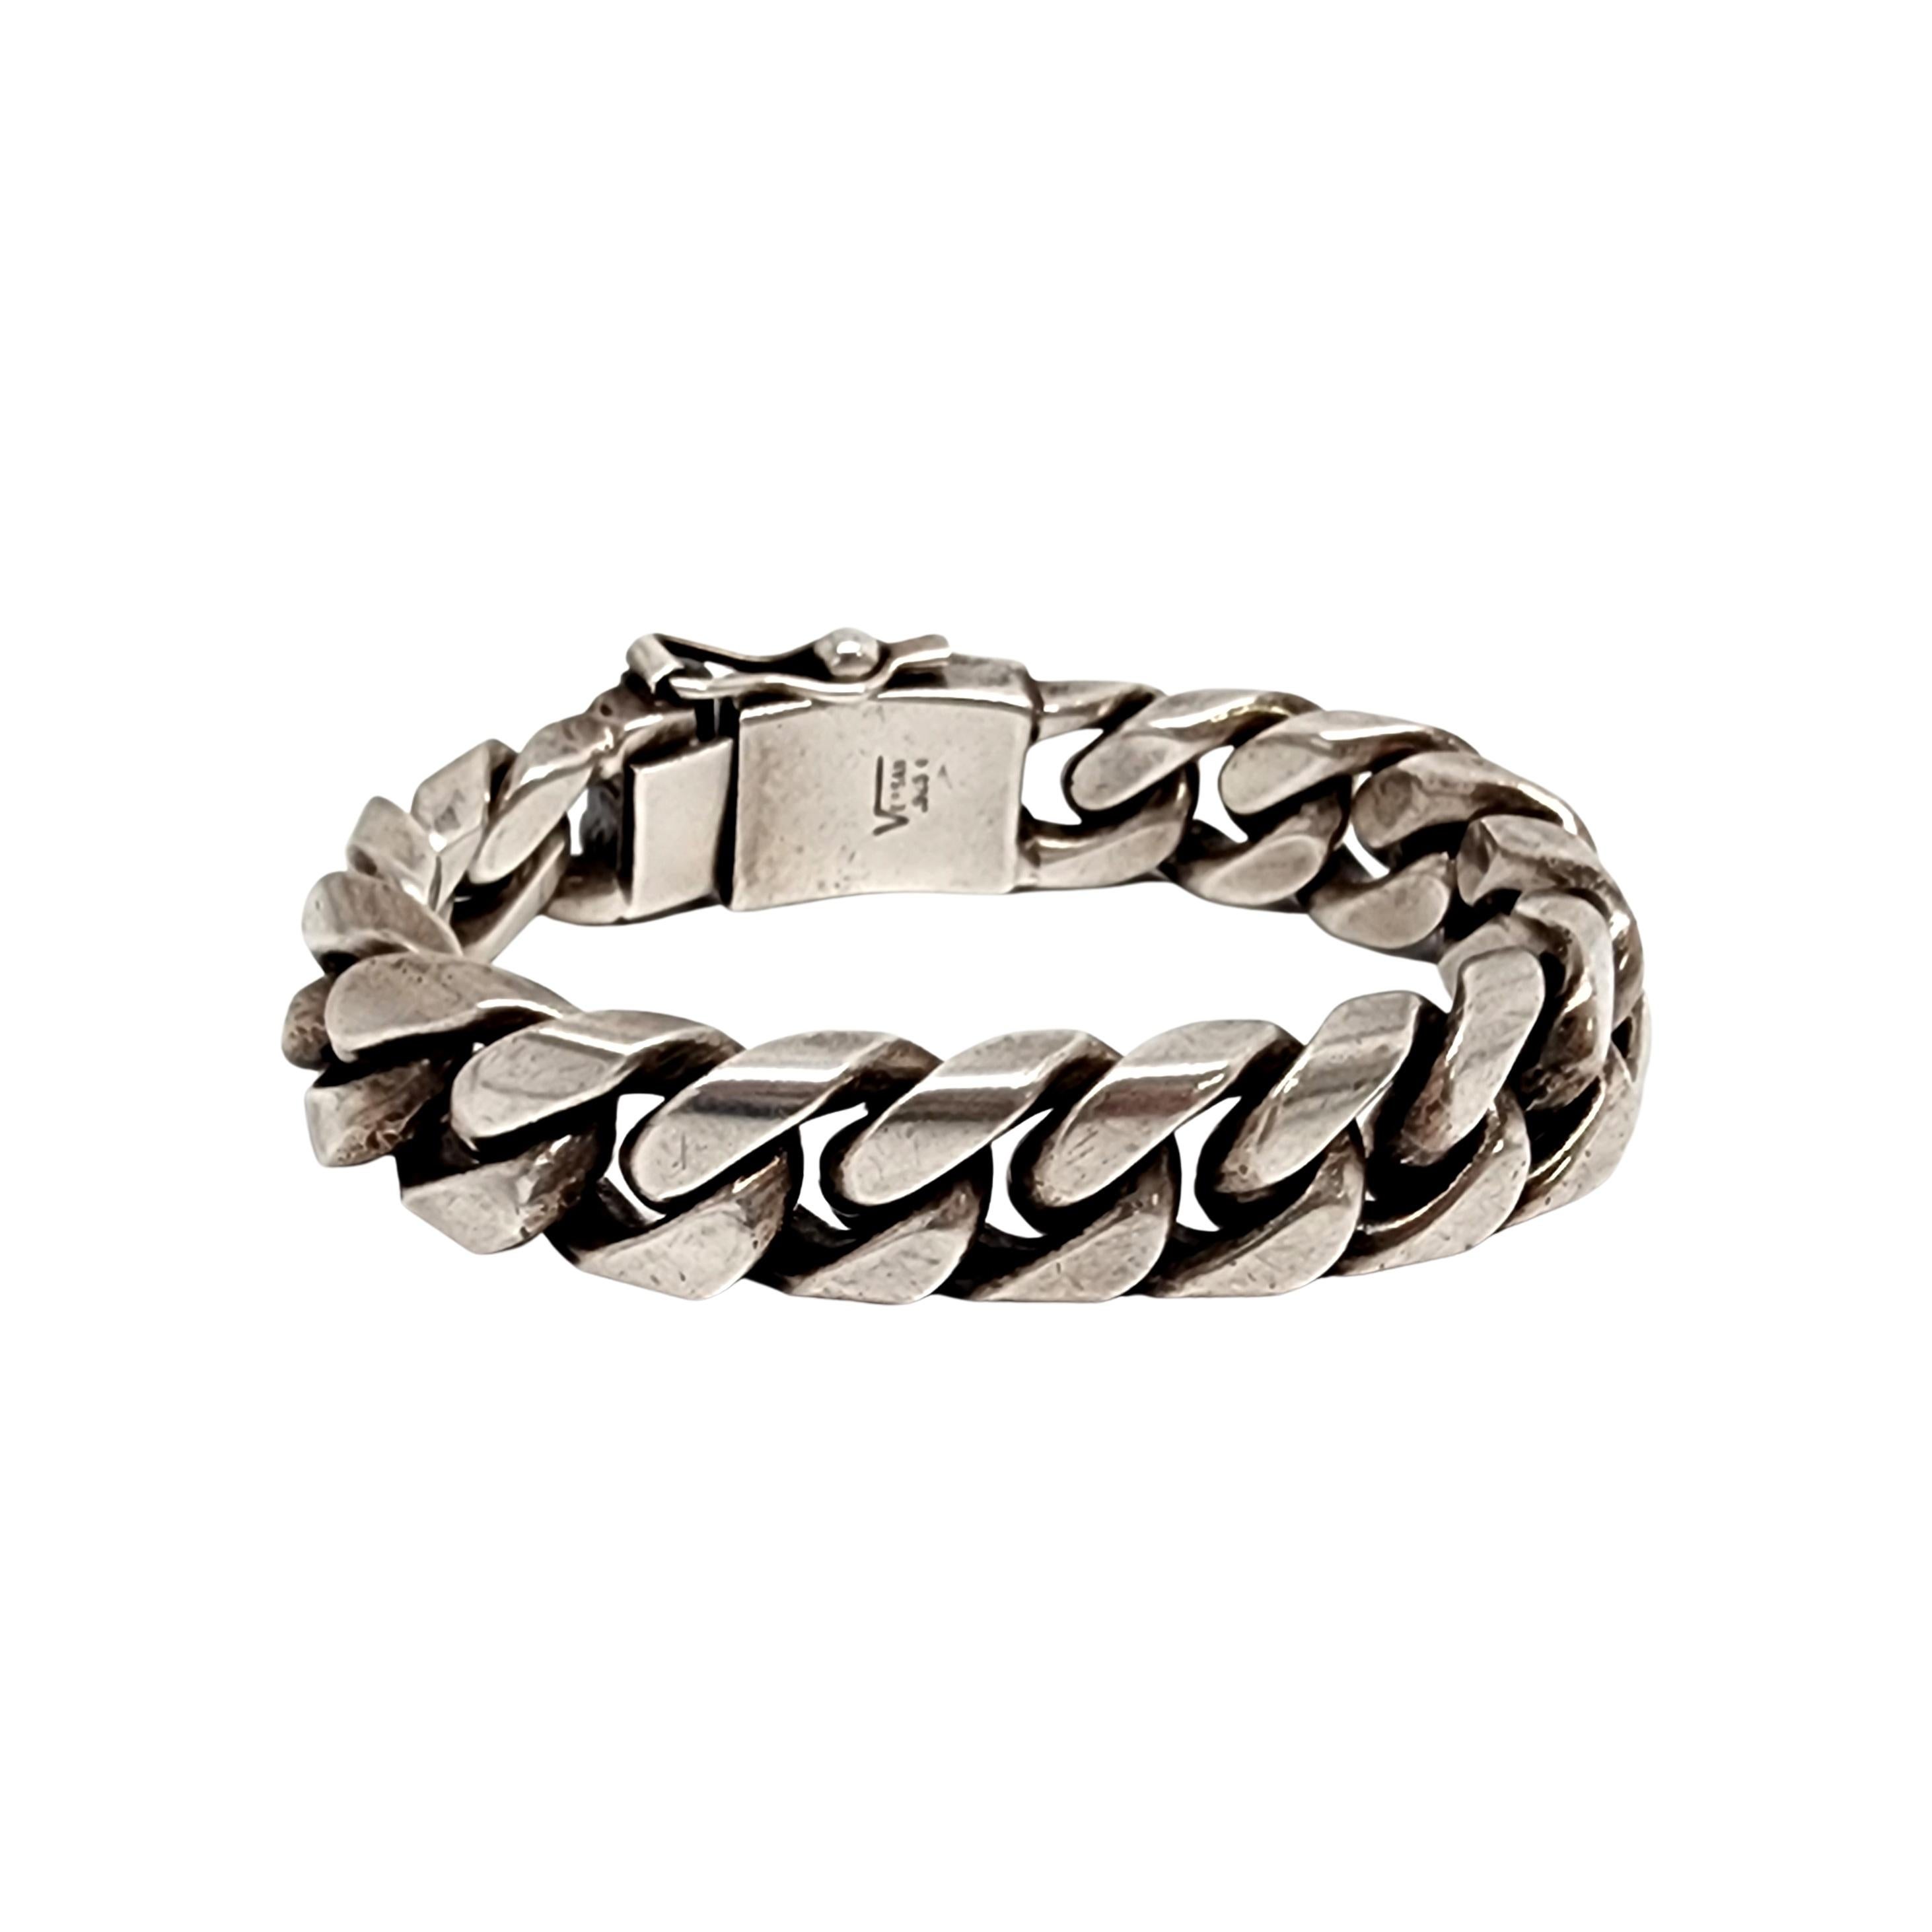 Heavy, thick sterling silver Cuban link bracelet with crown by Versani.

A bold and substantial piece, this Versani bracelet features wide Cuban links and an applied crown on its slide closure with figure 8 safety clasp.

Measures approx 8 3/4